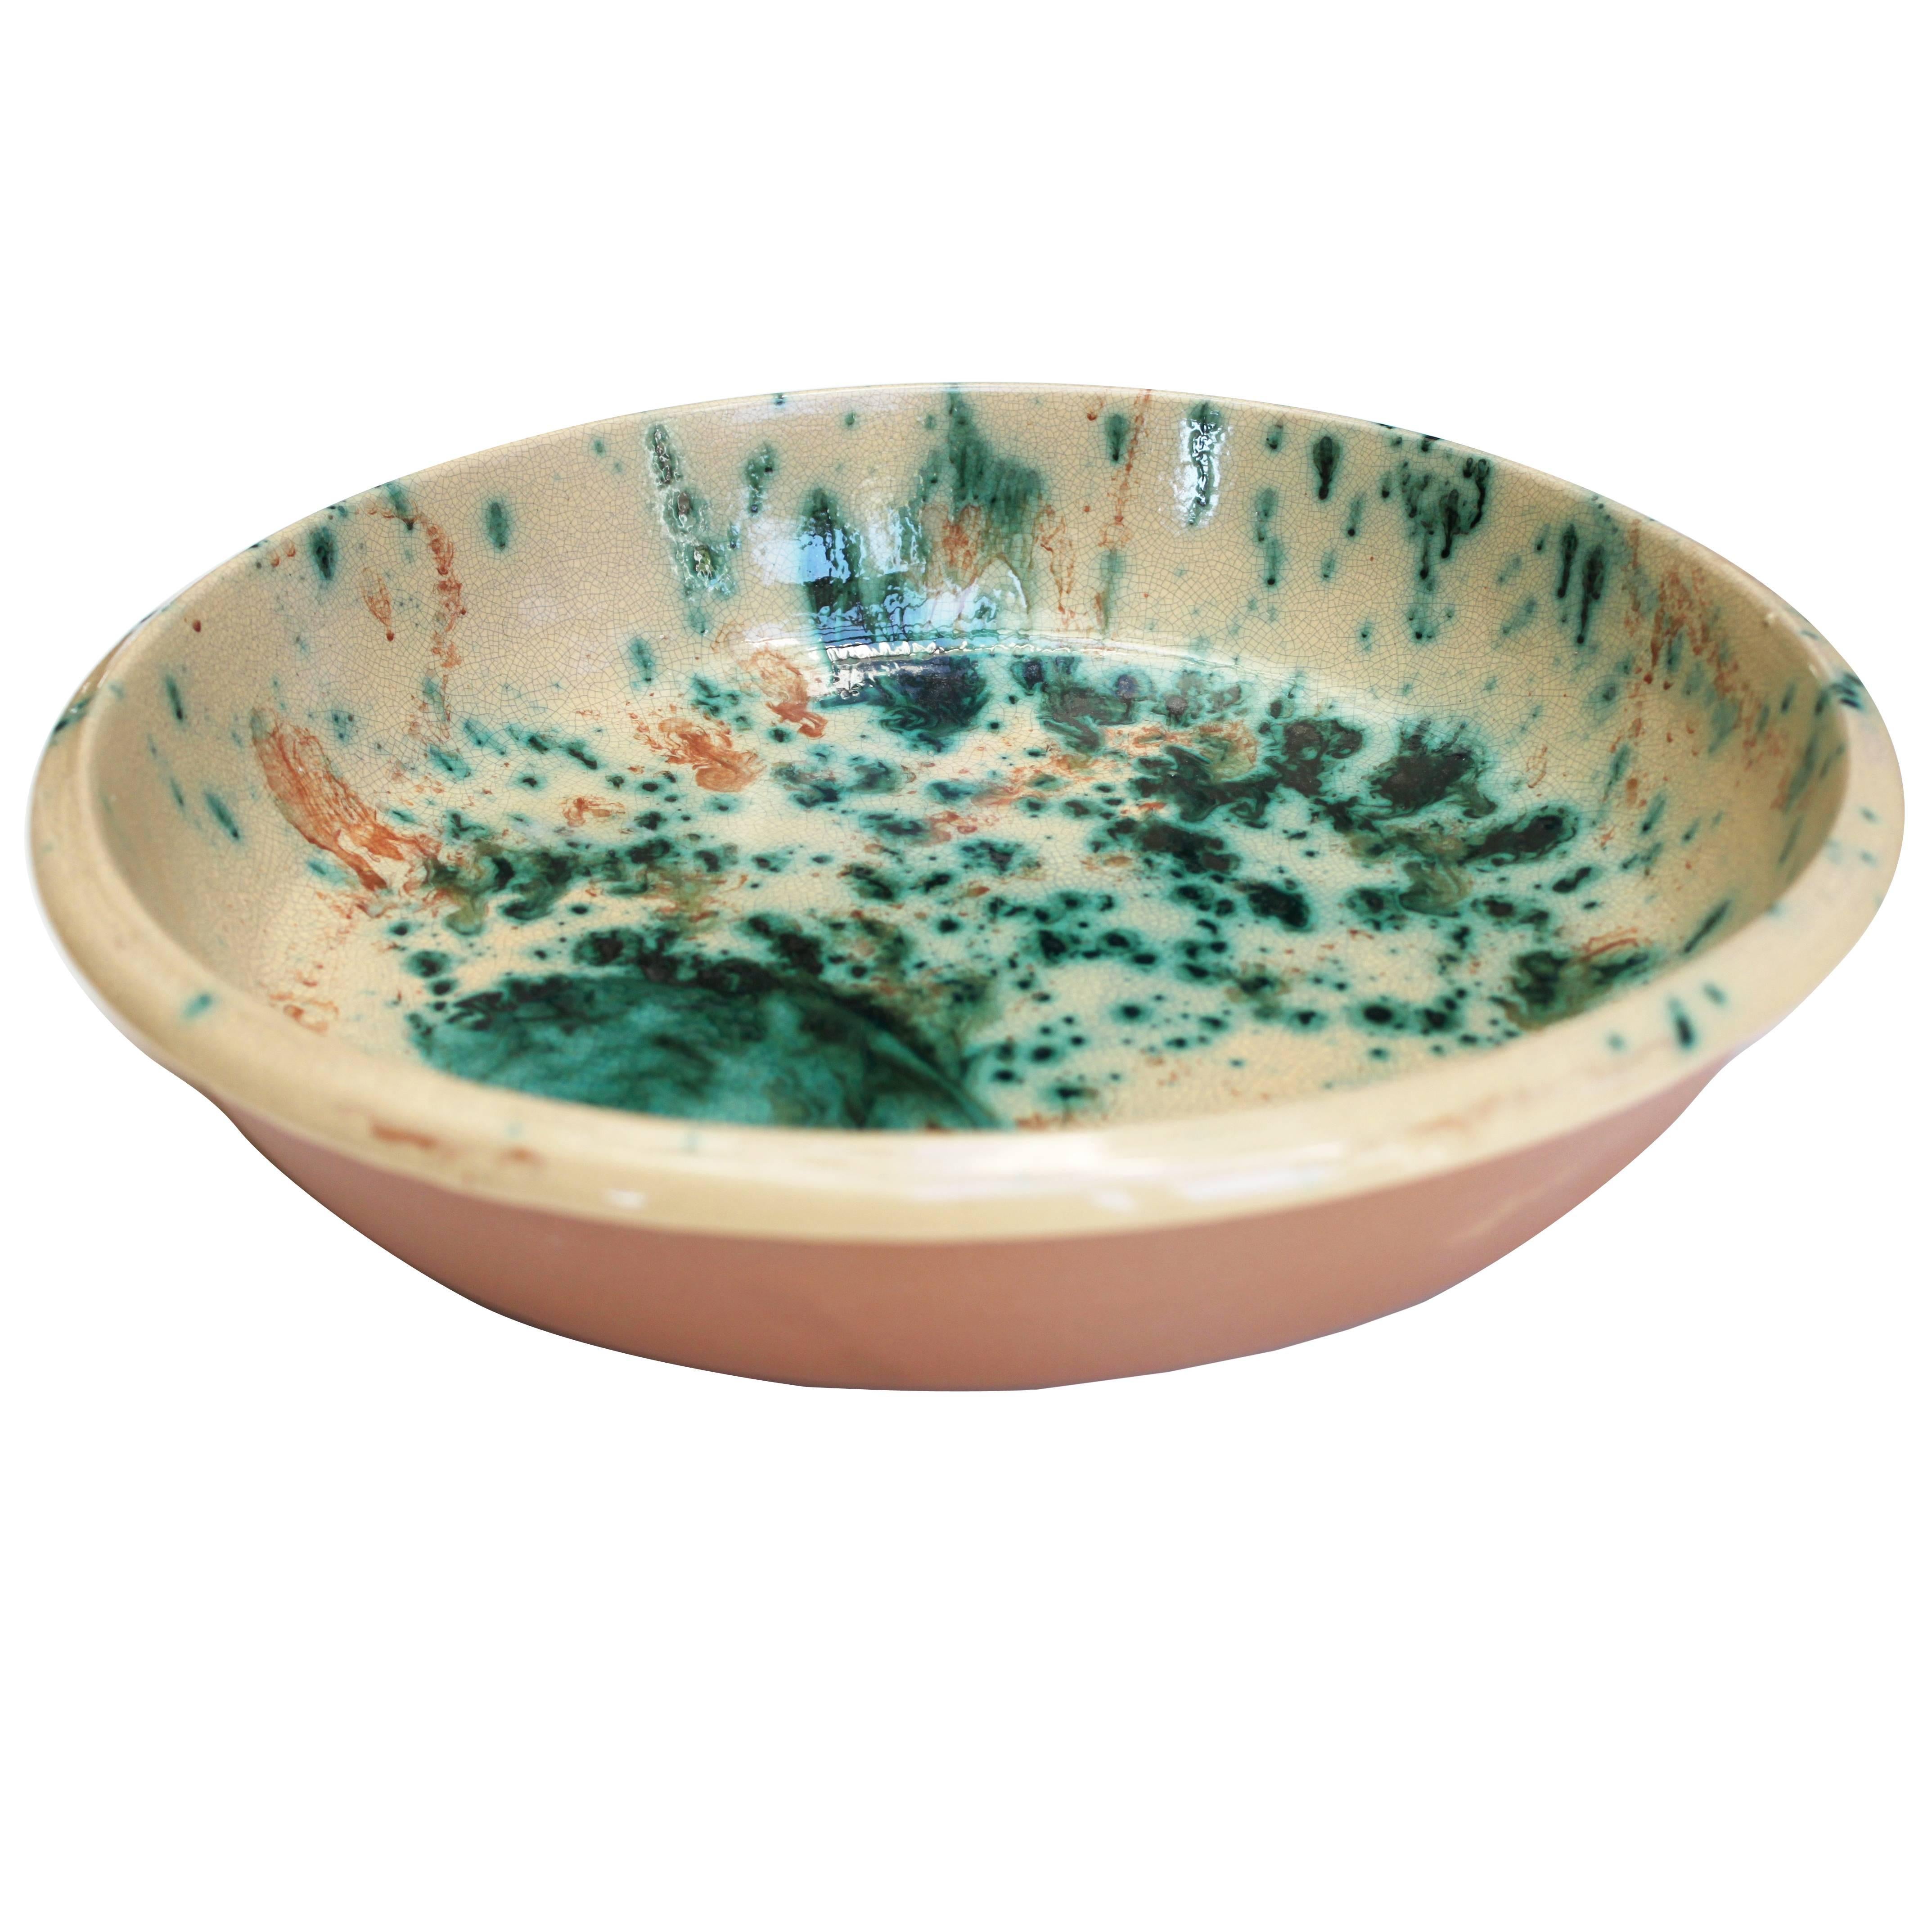 One of a Kind Serving Ceramic Bowl, Hand-Painted For Sale